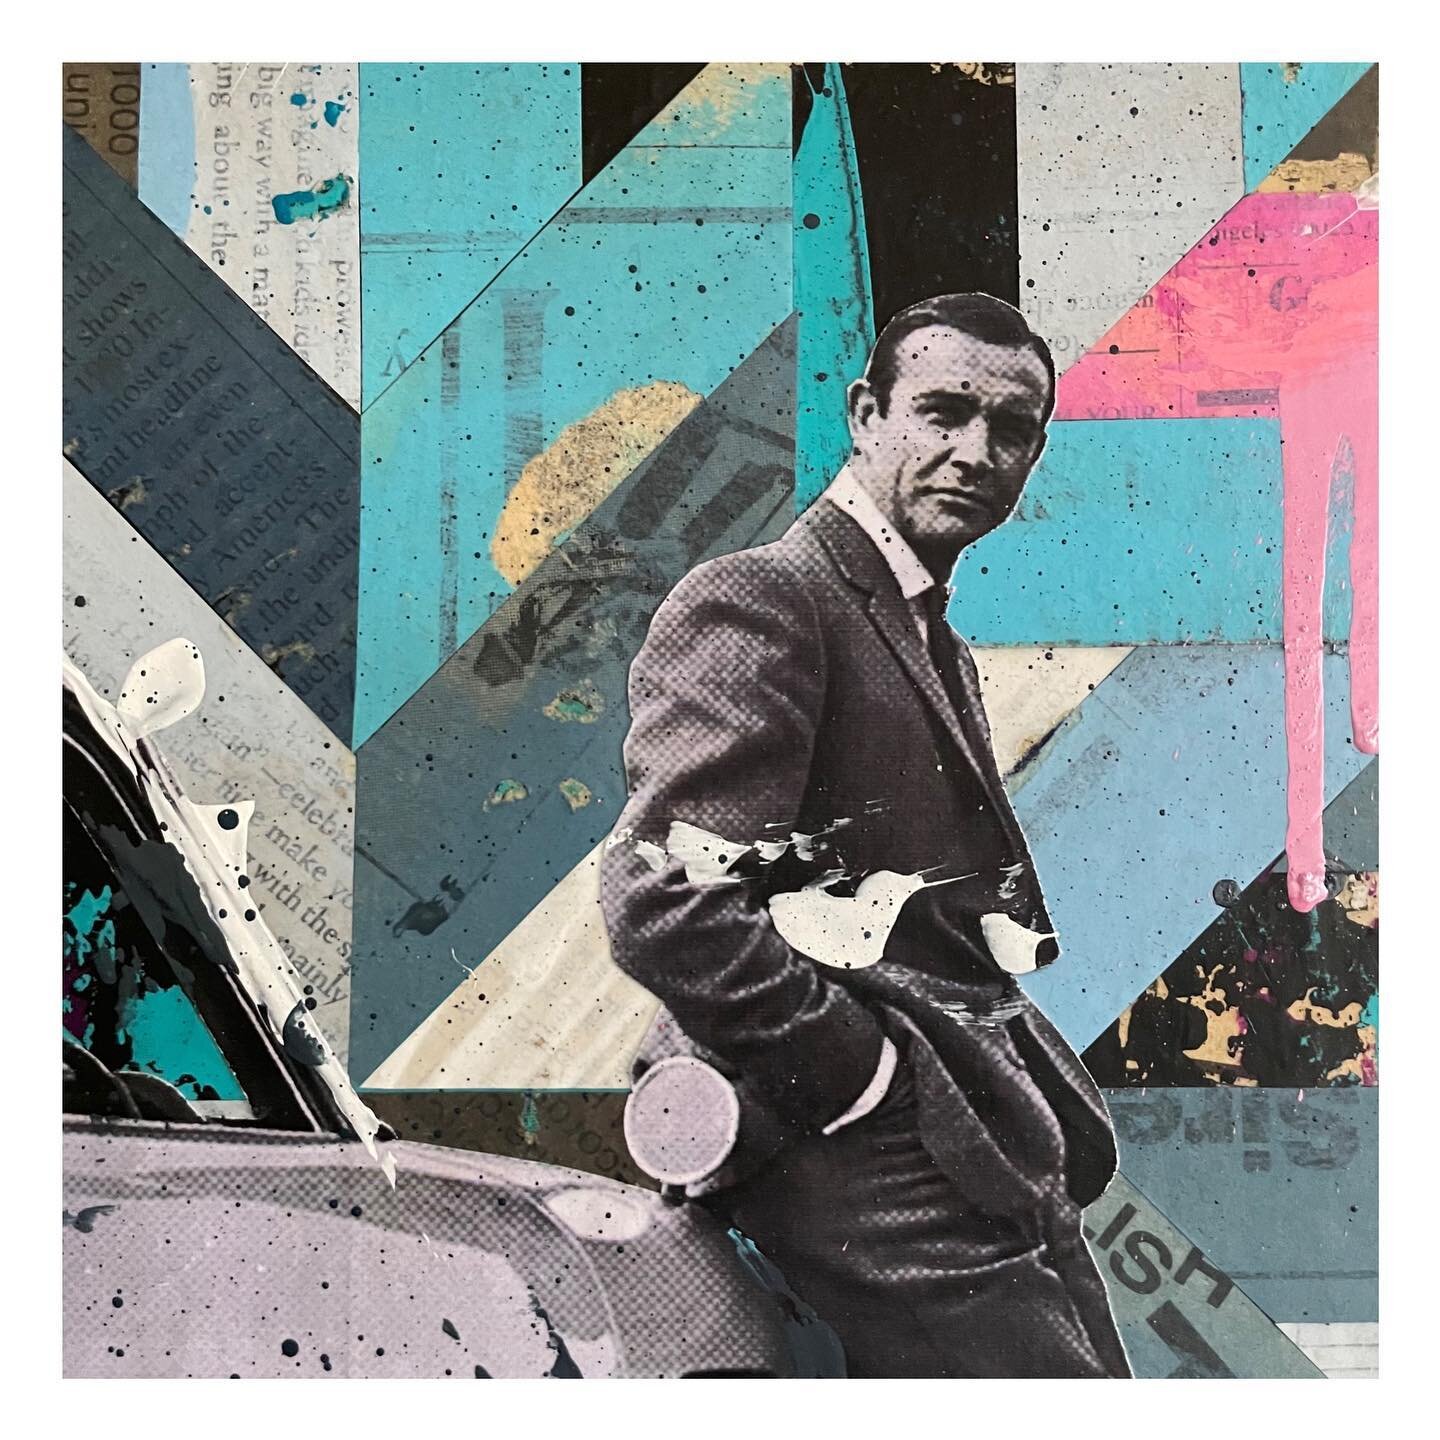 Closeup of this Sean Connery 007 mini. I just started working on the big version of this so if anyone wants to add the mini to their collection, it&rsquo;s available on my website. 

#ContemporaryArt #MixedMediaArt #AbstractArt #GeyerArt #ArtCollecto